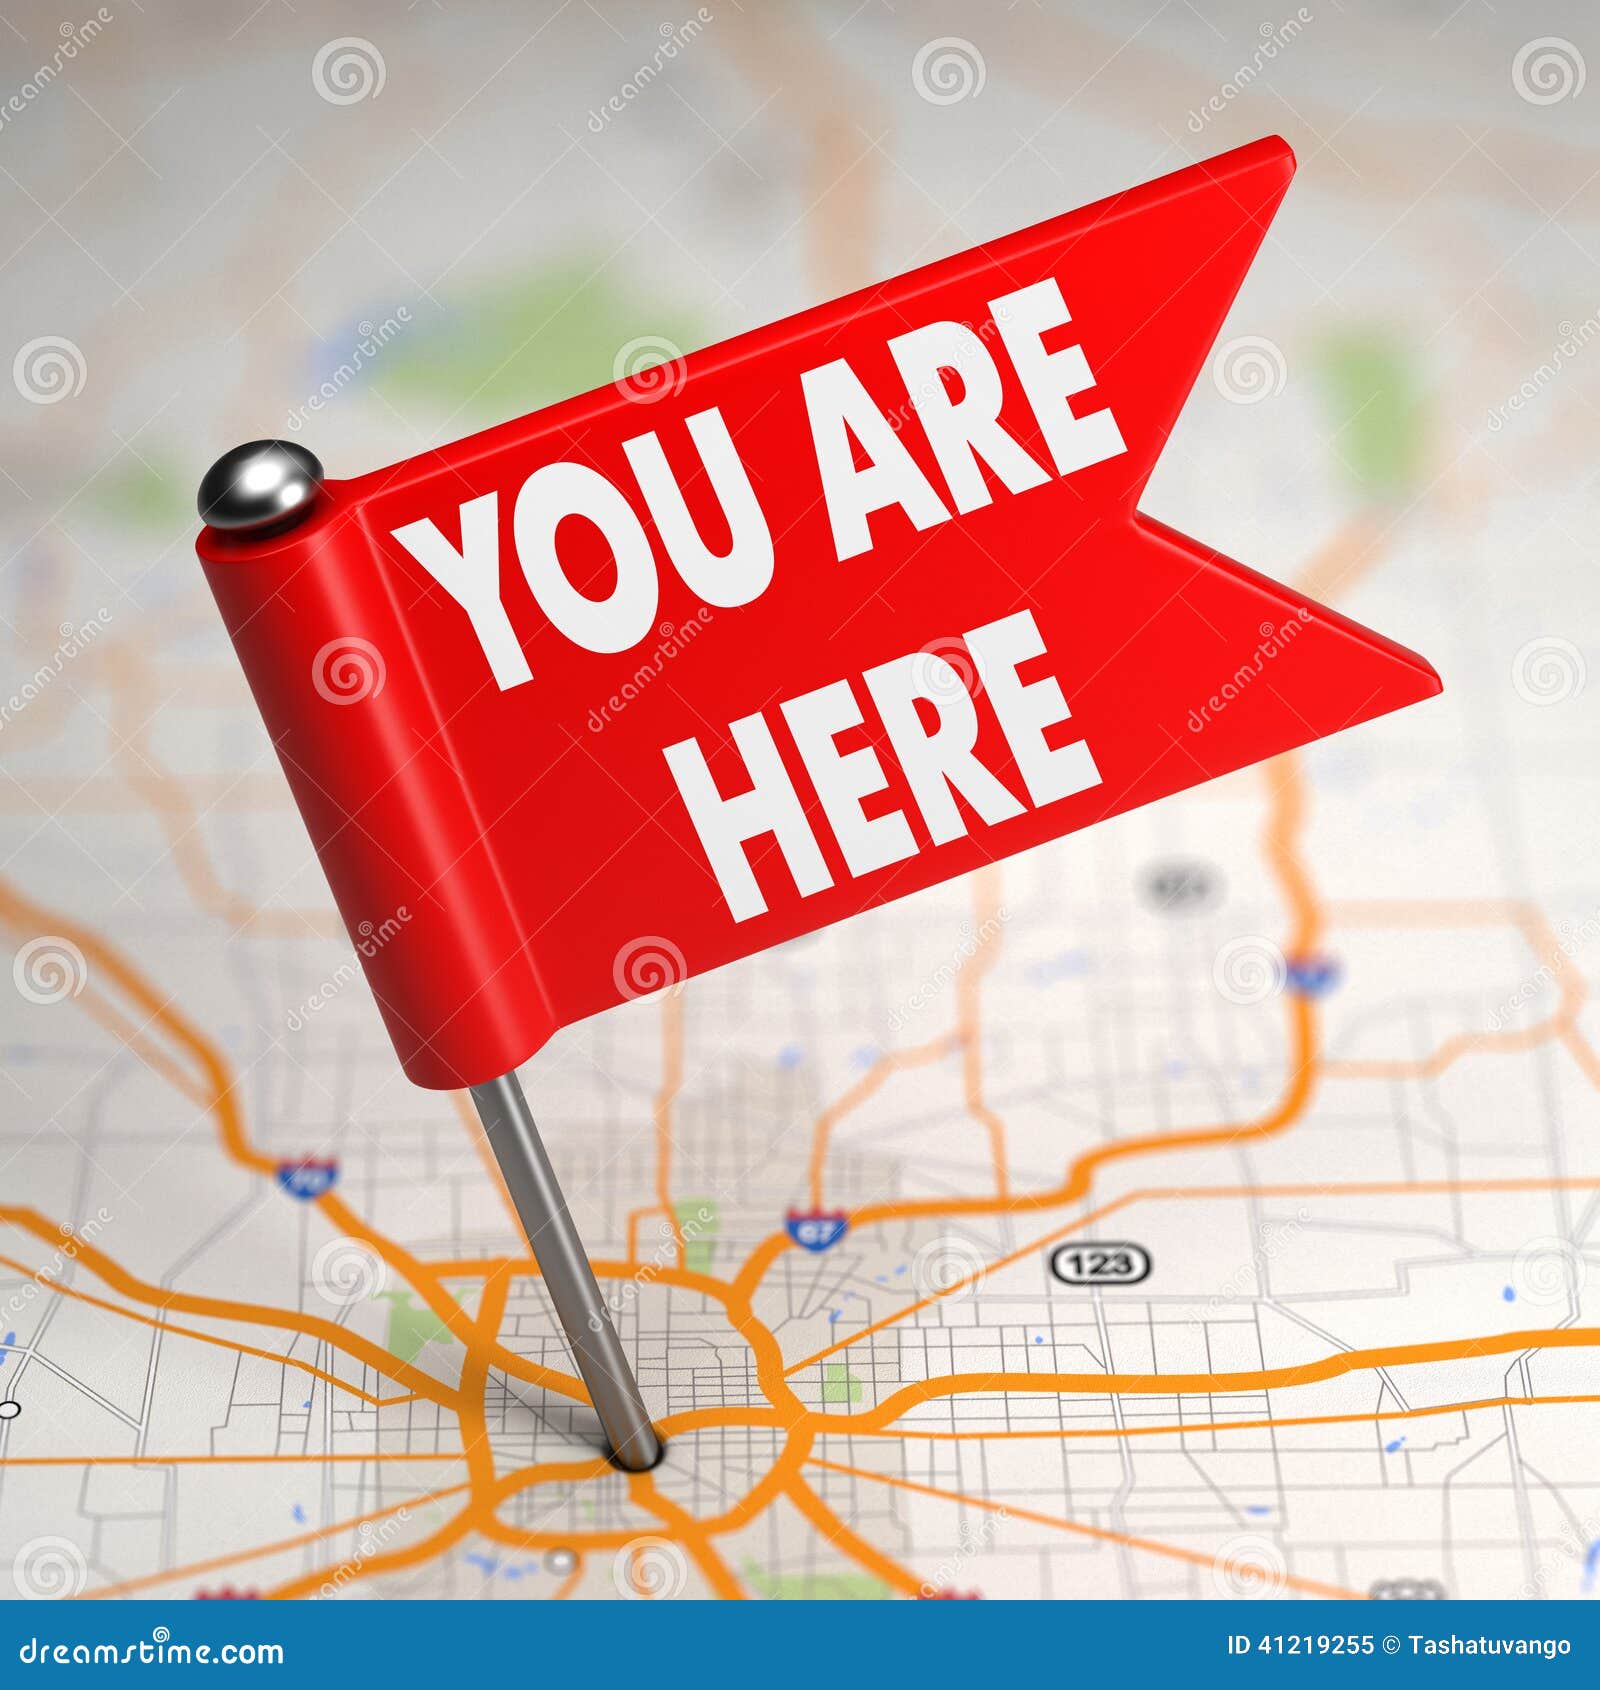 clip art you are here sign - photo #34